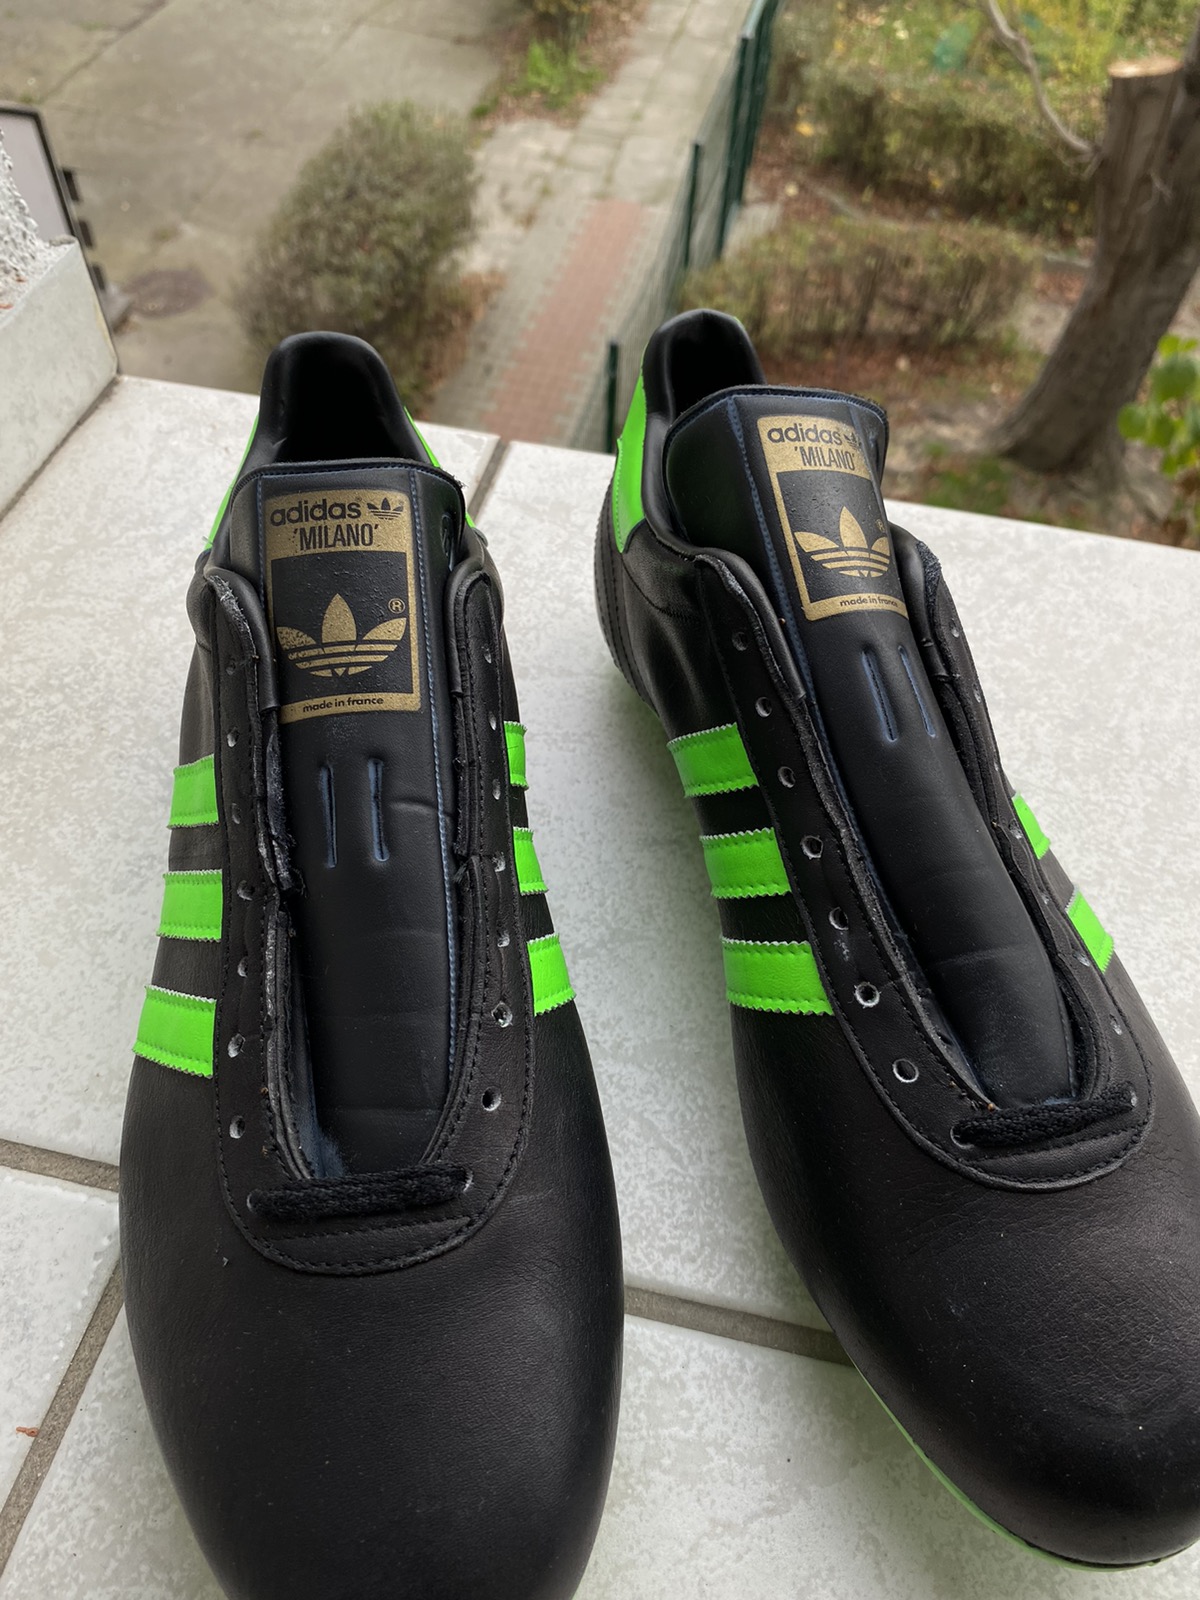 Adidas Milano made in France football boots 70-80s - 3